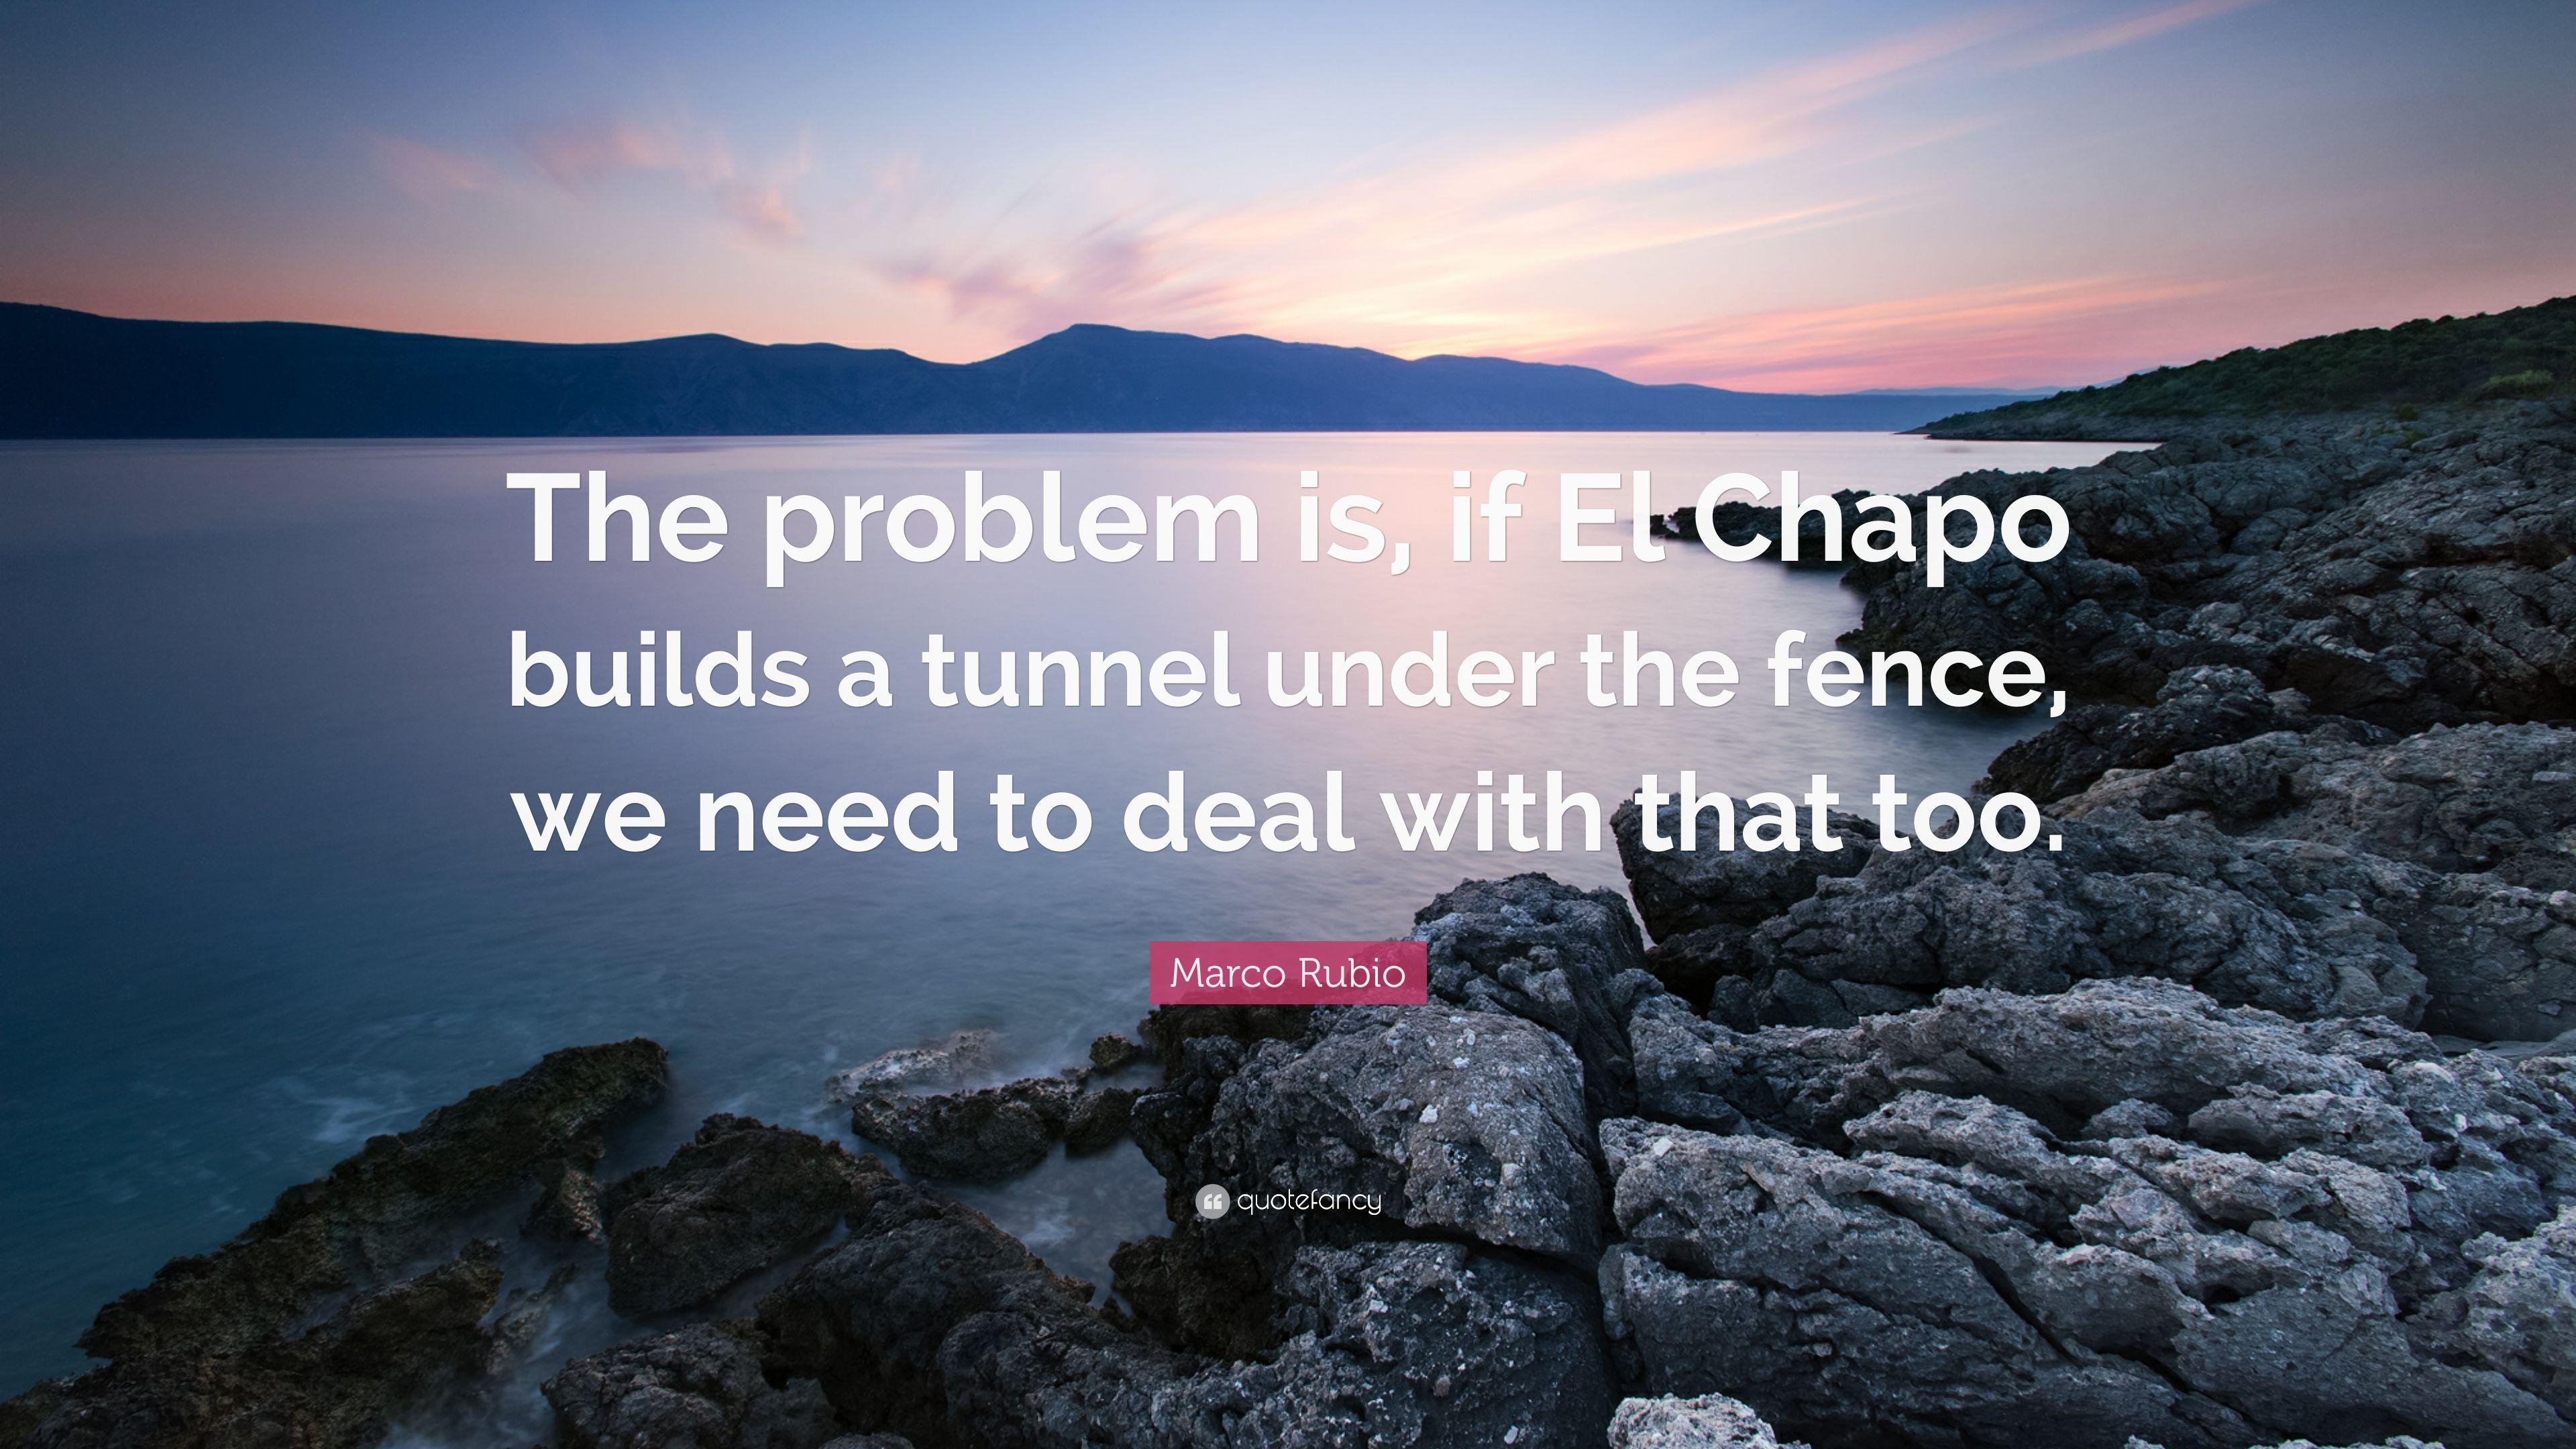 Marco Rubio Quote: “The problem is, if El Chapo builds a tunnel